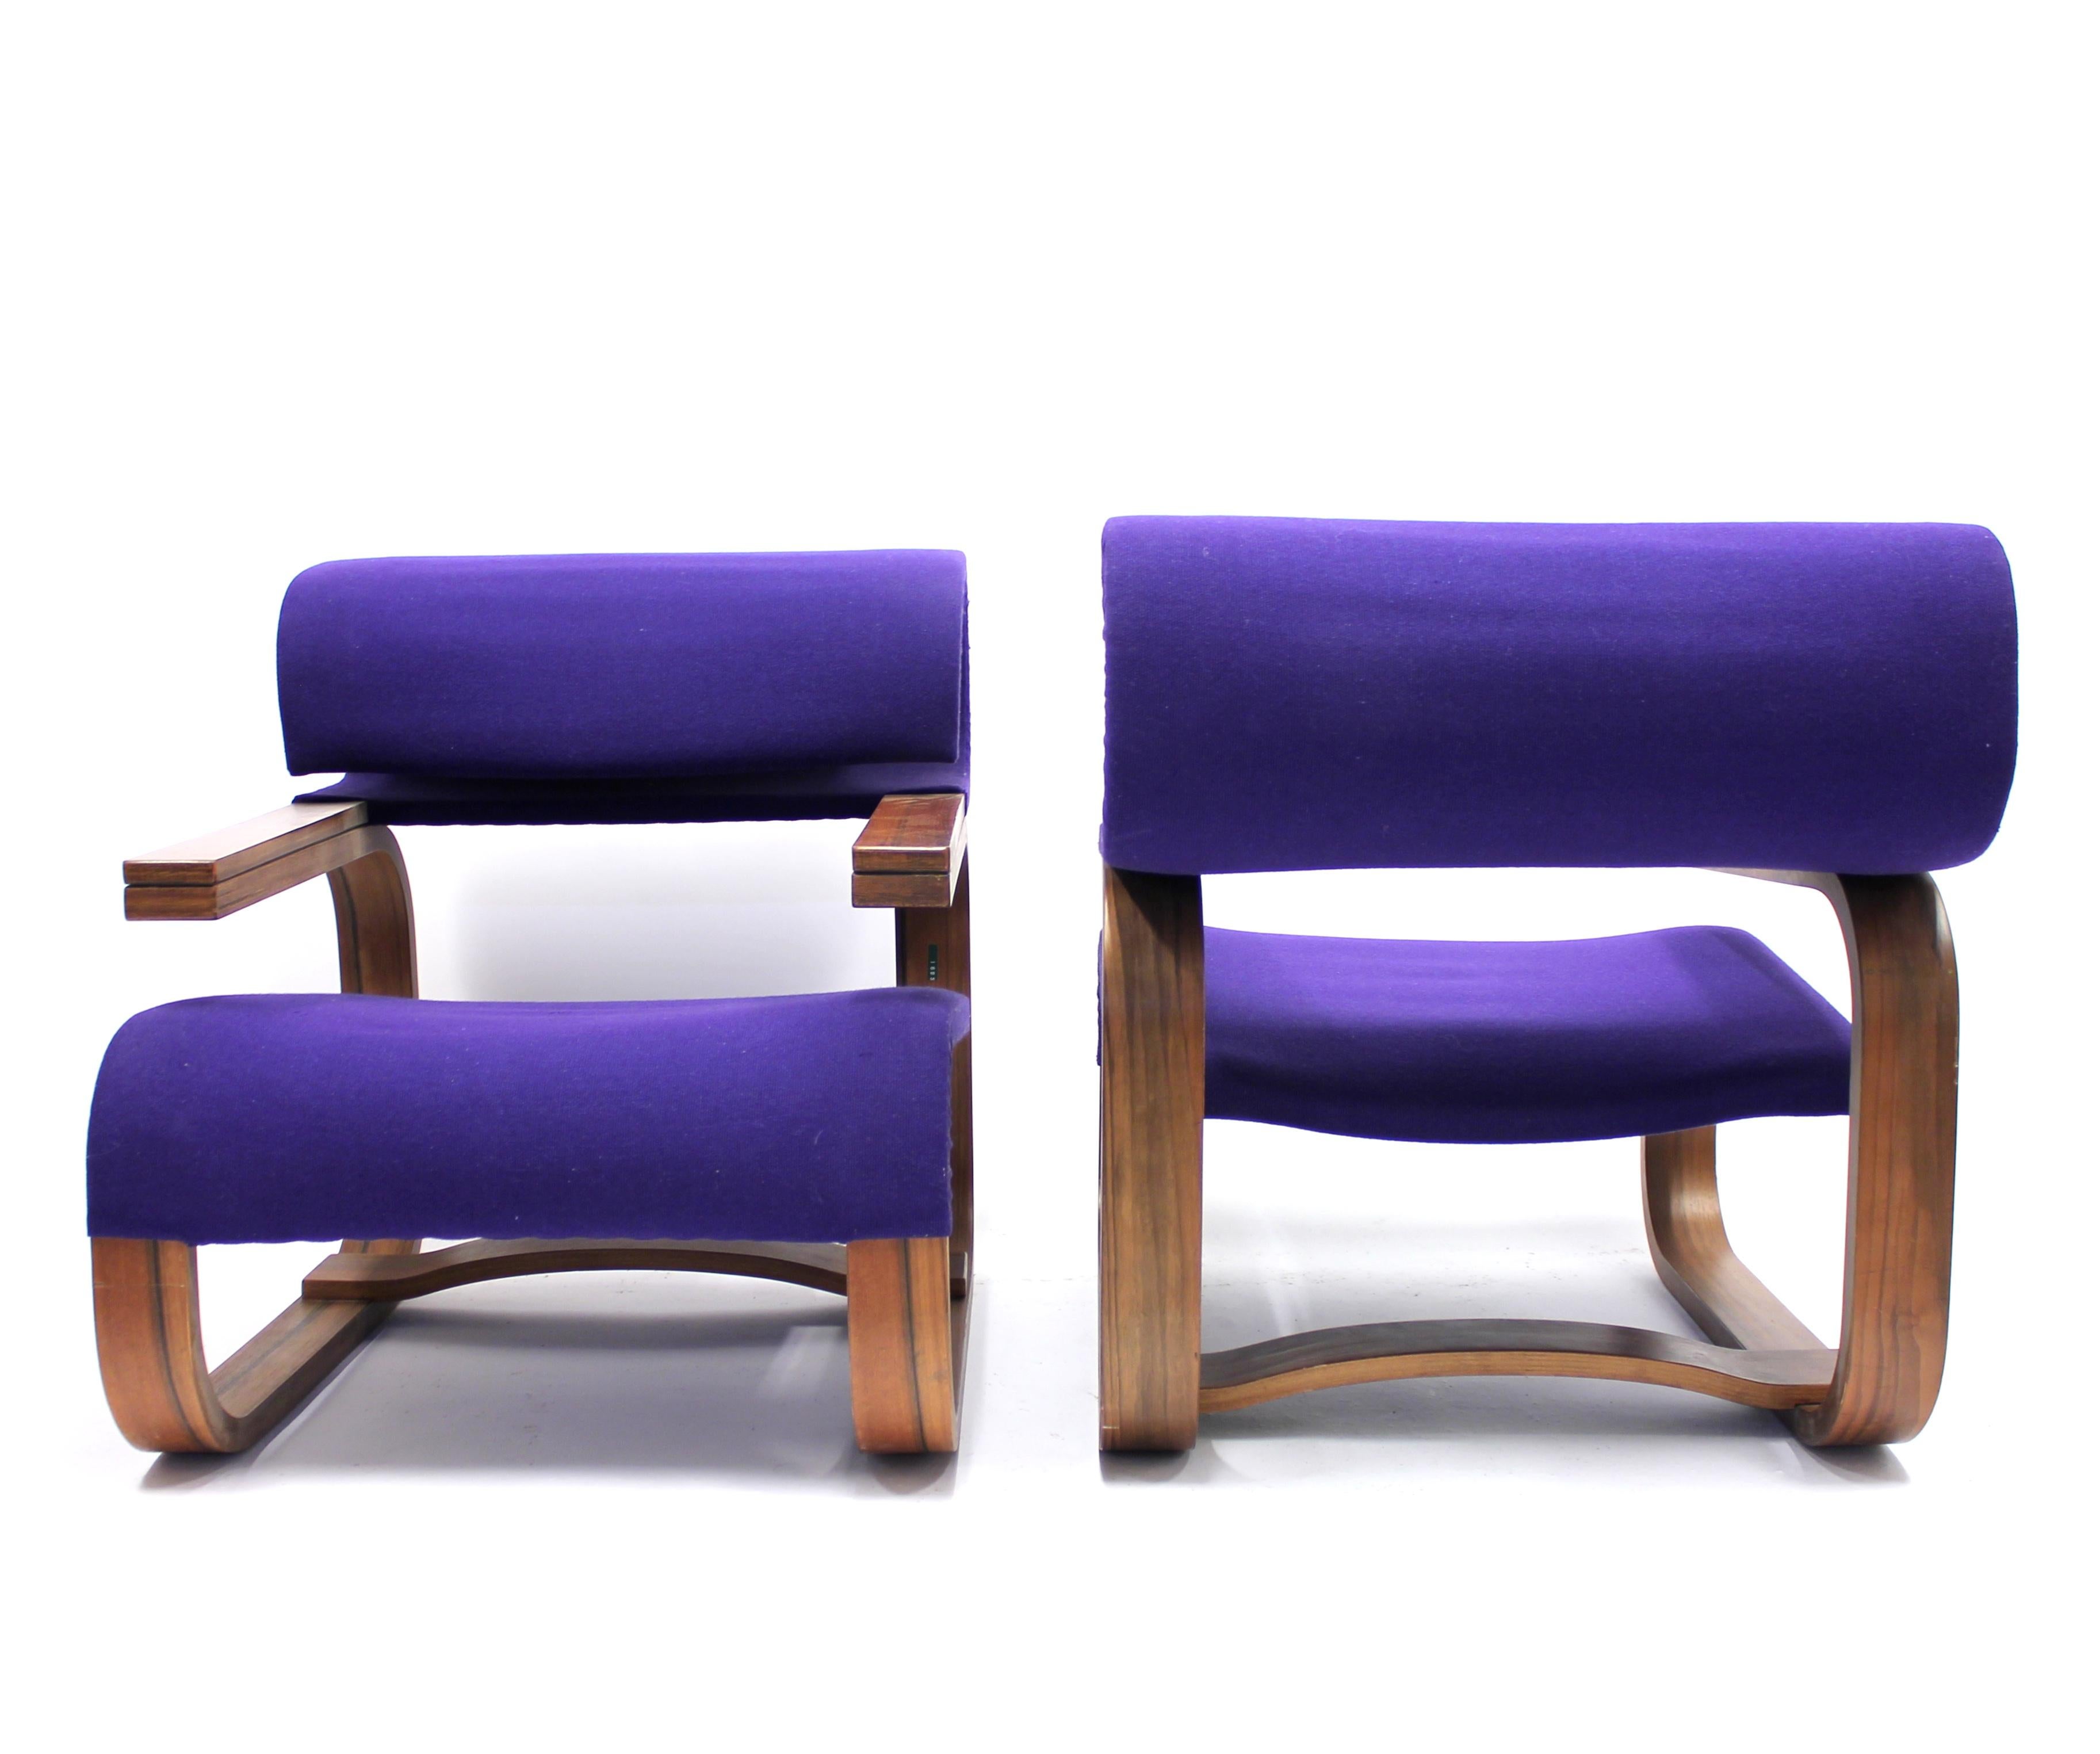 Fabric Pair of Chairs by Jan Bočan for the Czechoslovakian Embassy, Stockholm, 1972